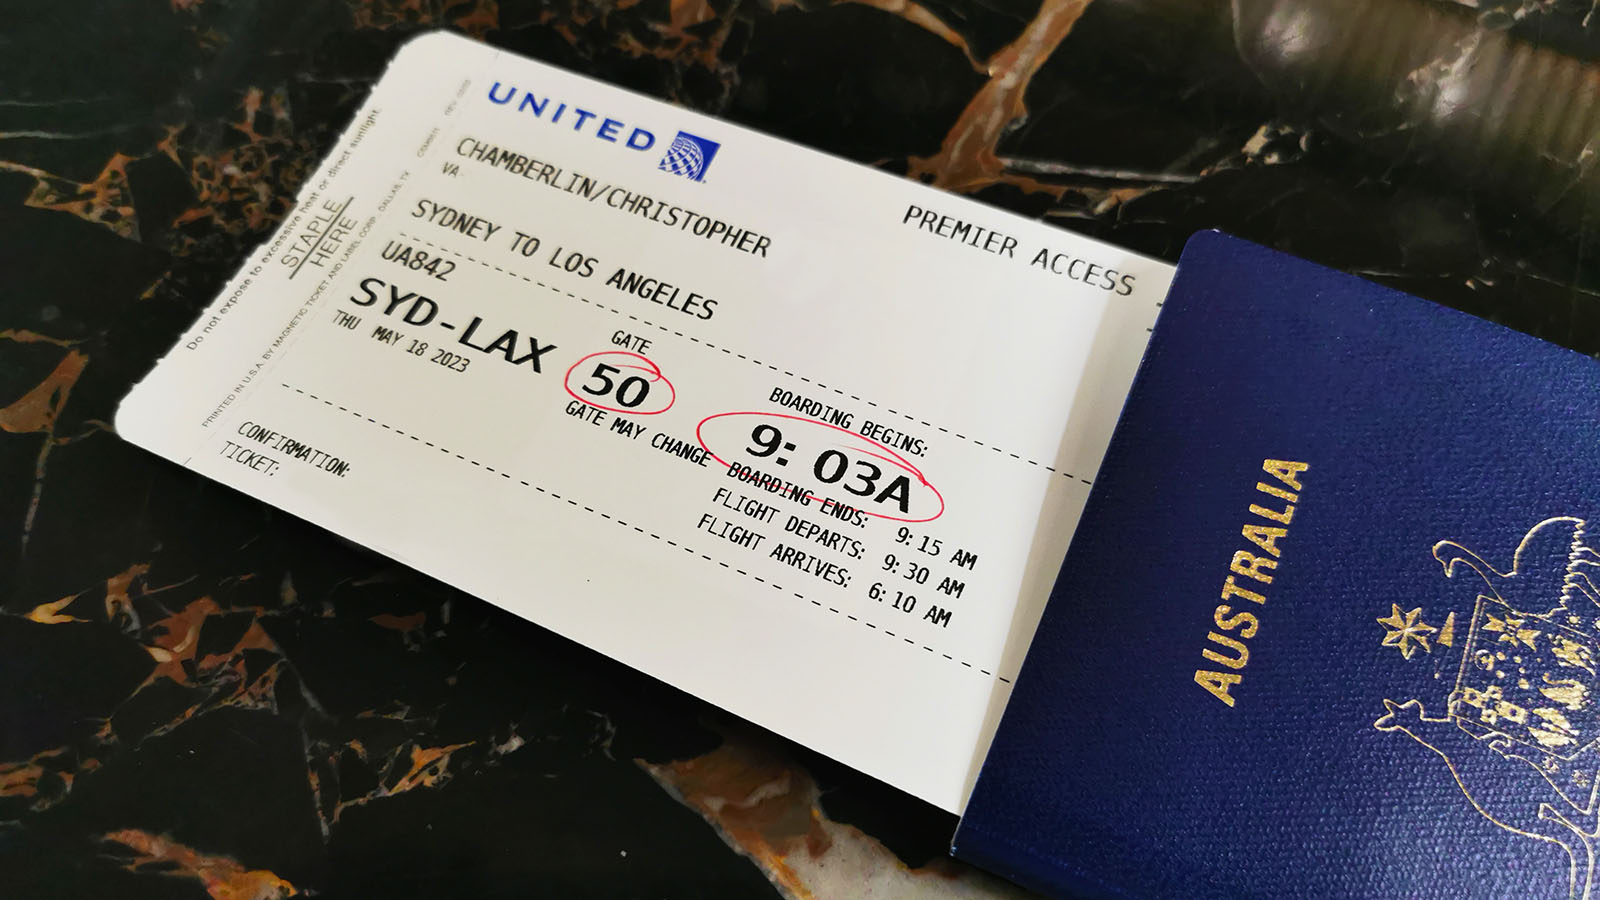 United Airlines ticket